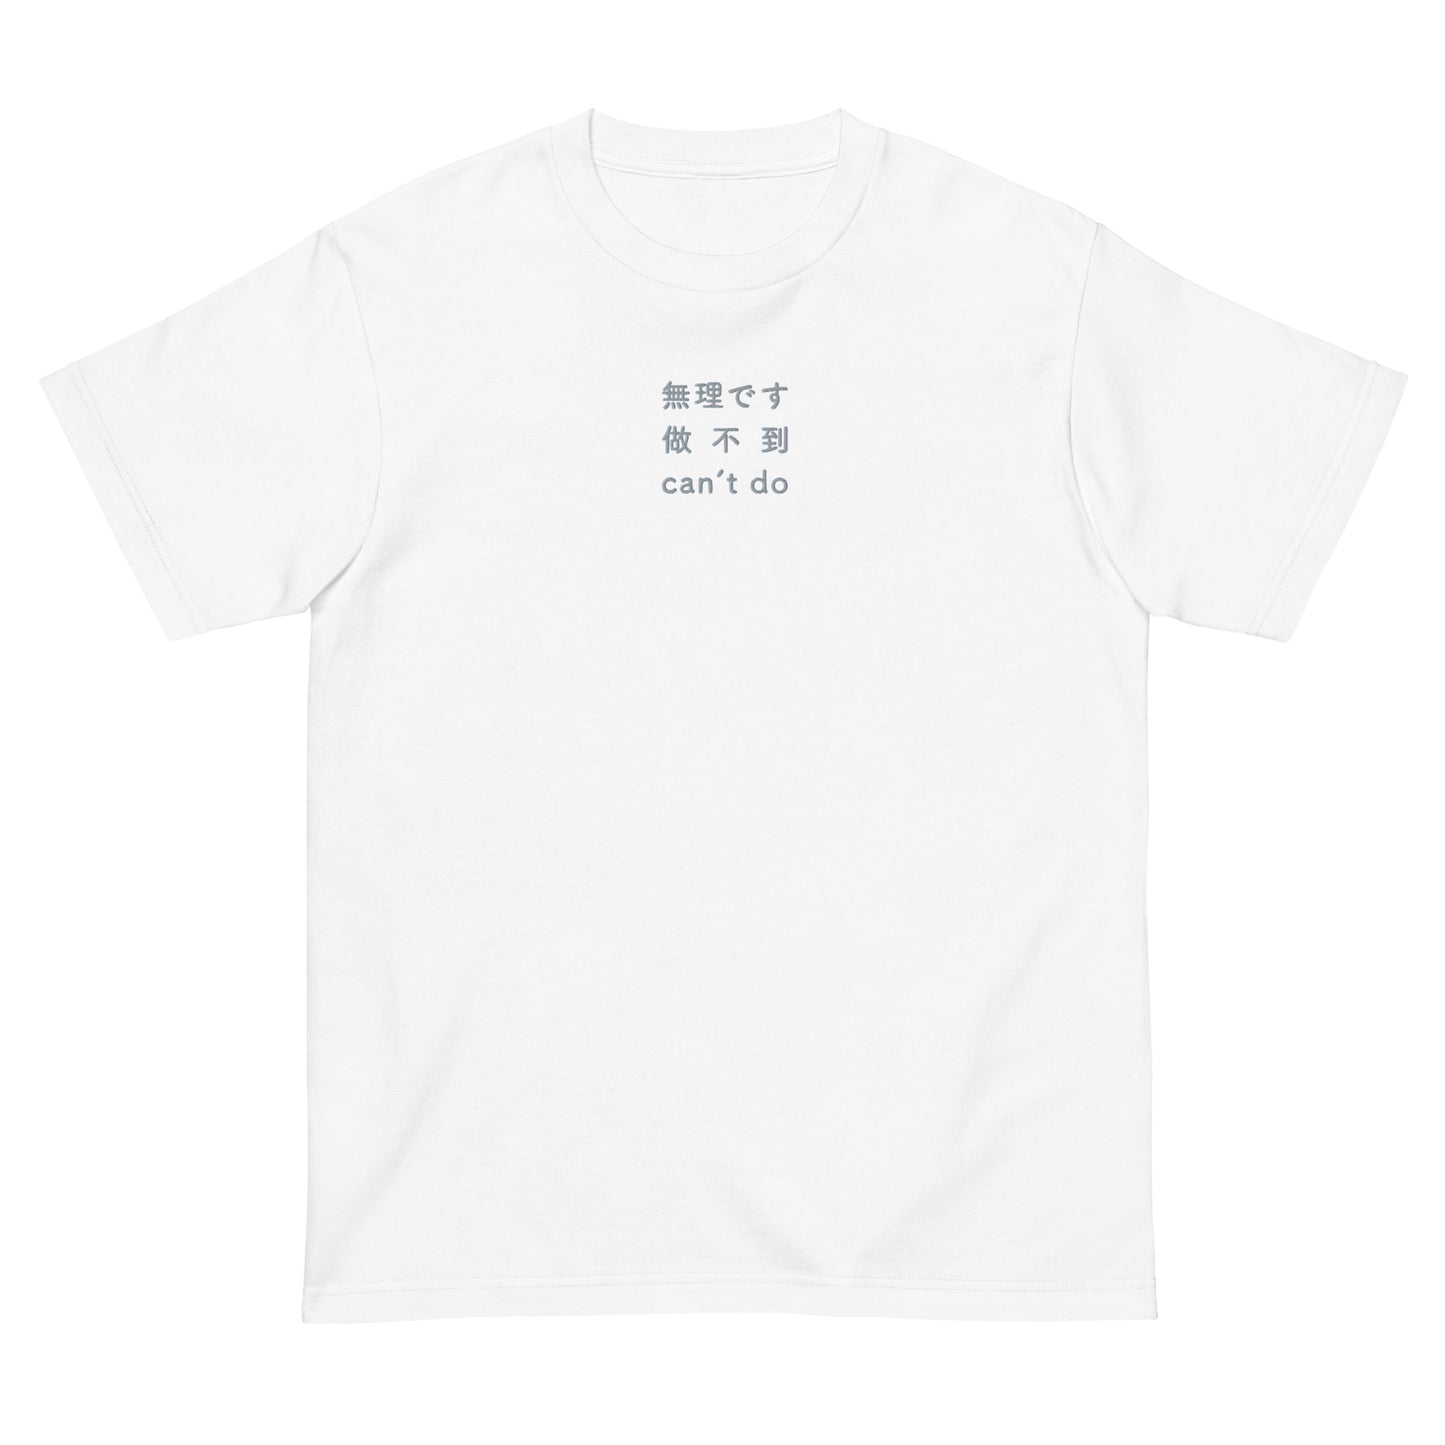 White High Quality Tee - Front Design with an Light Gray Embroidery "Can't Do" in Japanese, Chinese and English